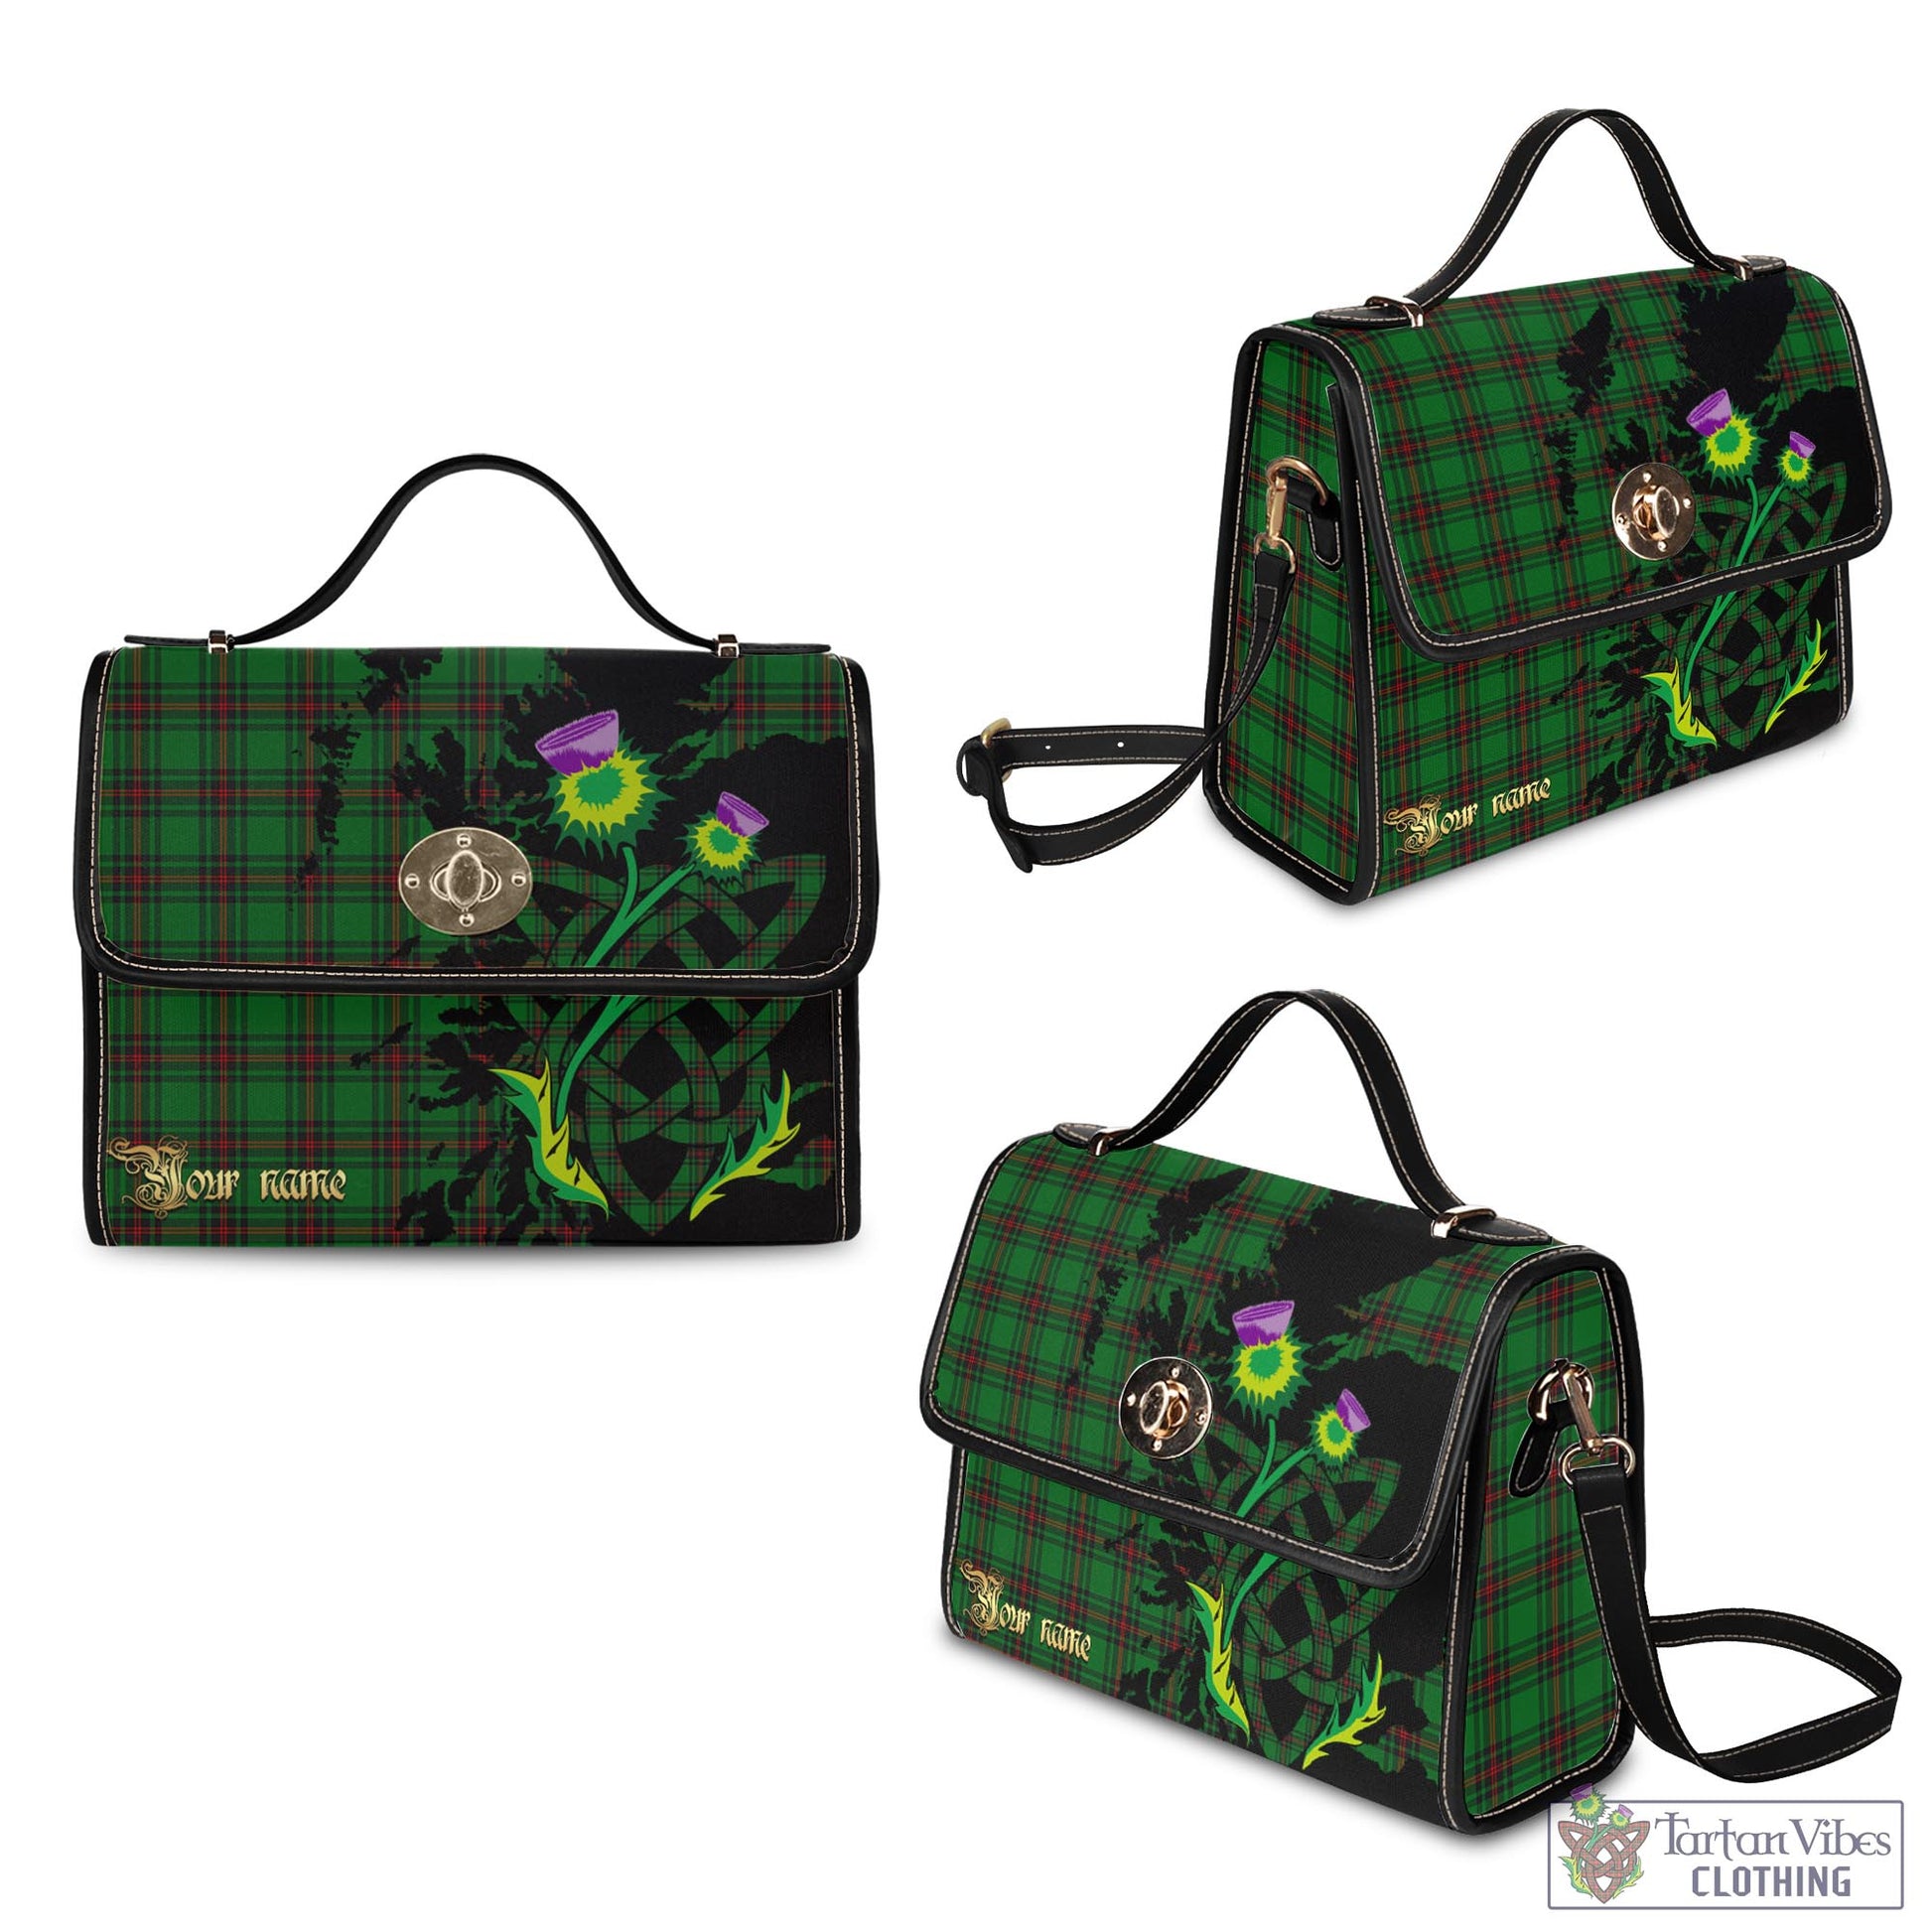 Tartan Vibes Clothing Beveridge Tartan Waterproof Canvas Bag with Scotland Map and Thistle Celtic Accents